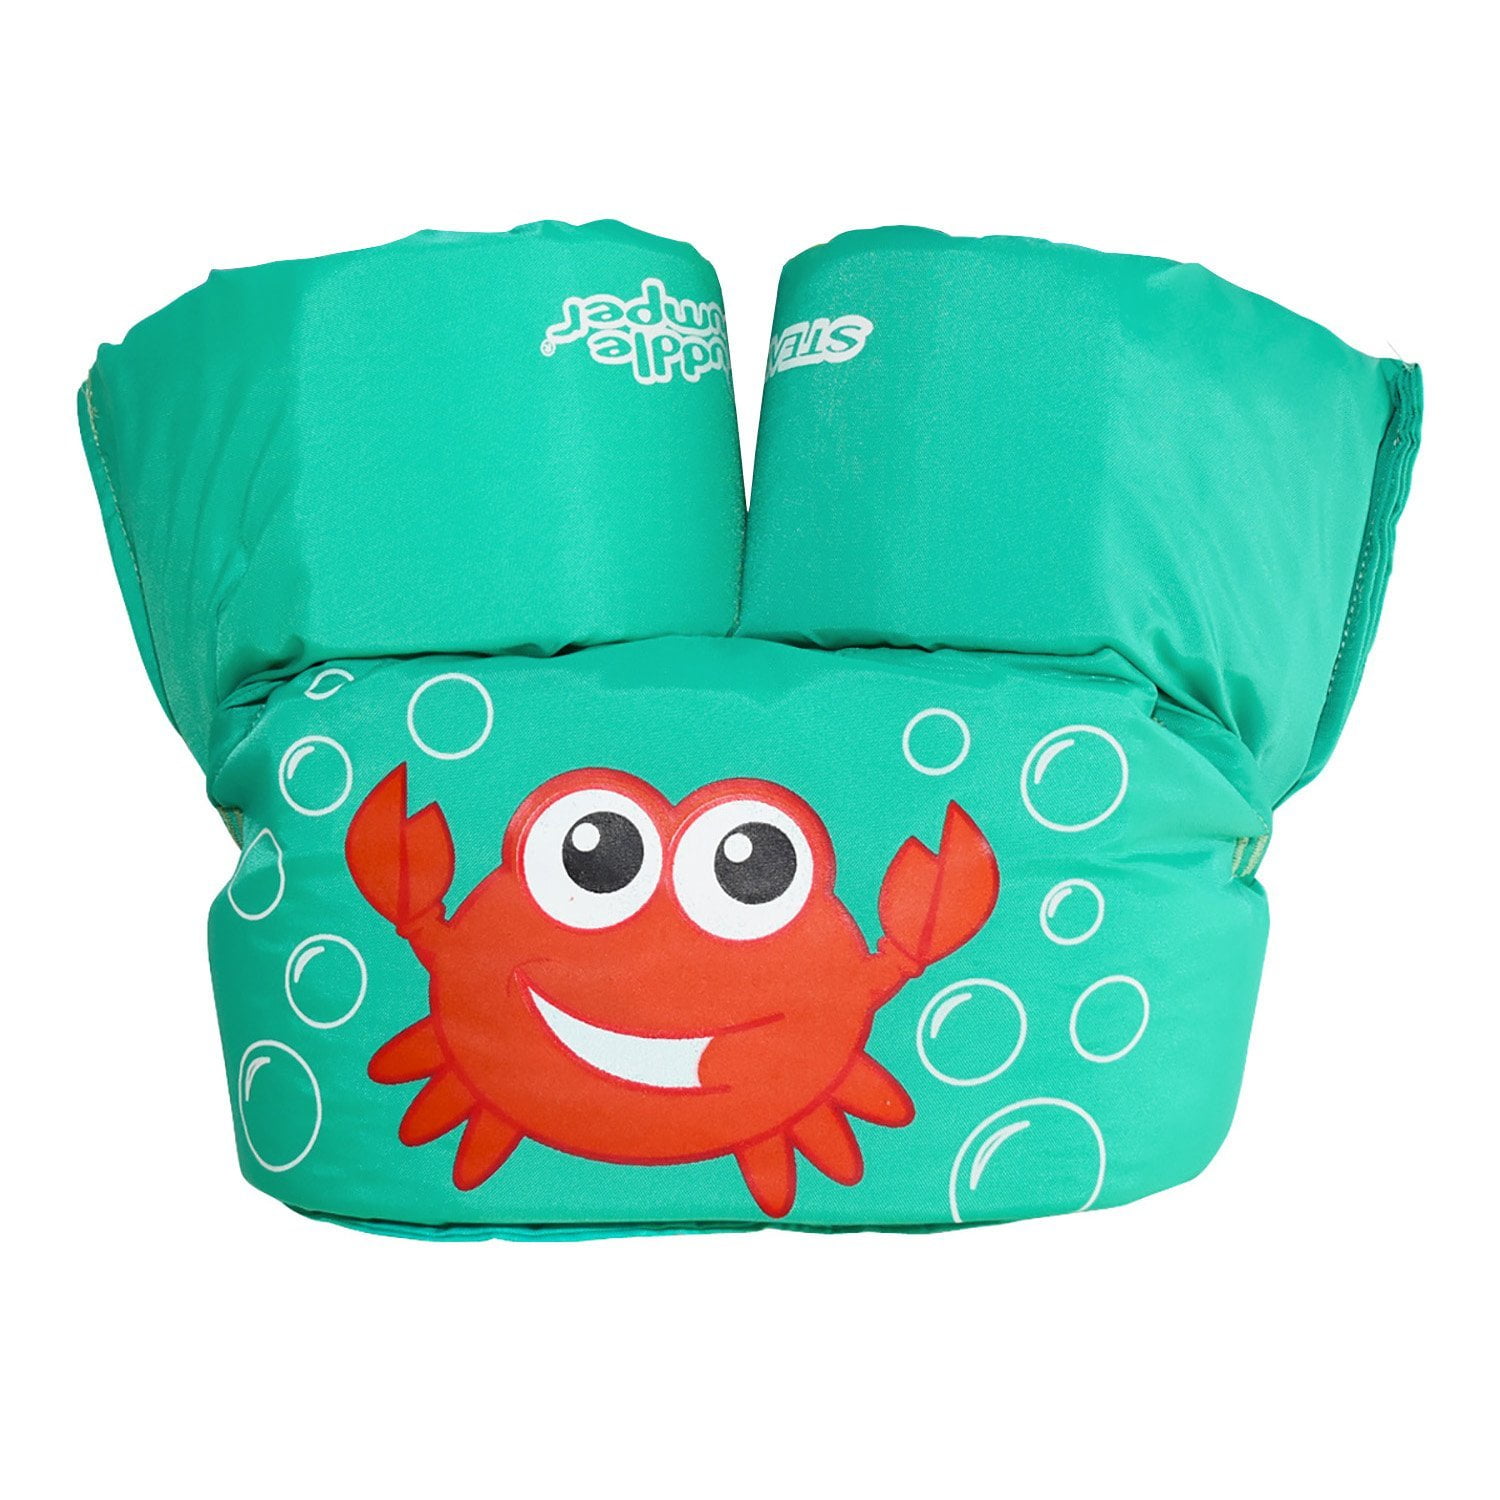 Aqua Crab The Coleman Company Stearns Puddle Jumper Basic Life Jacket 3000002179 One Size 30-50 lbs Green/Red 